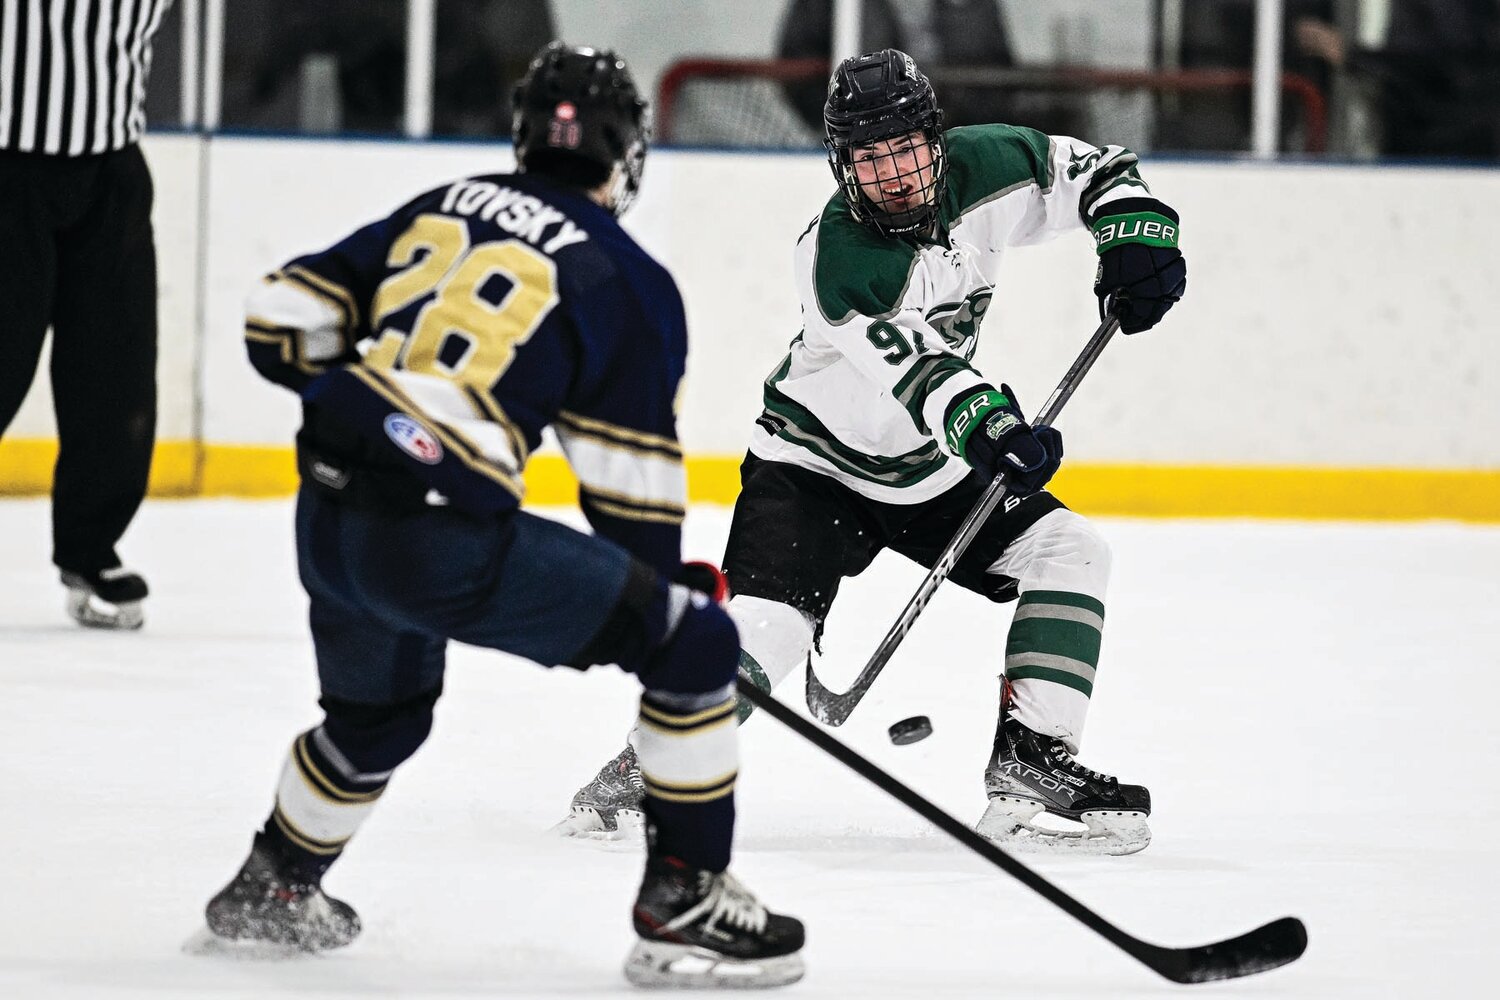 Pennridge’s Nicholas Young gets off a shot as Council Rock South’s Chase Tovsky closes in during the third period.